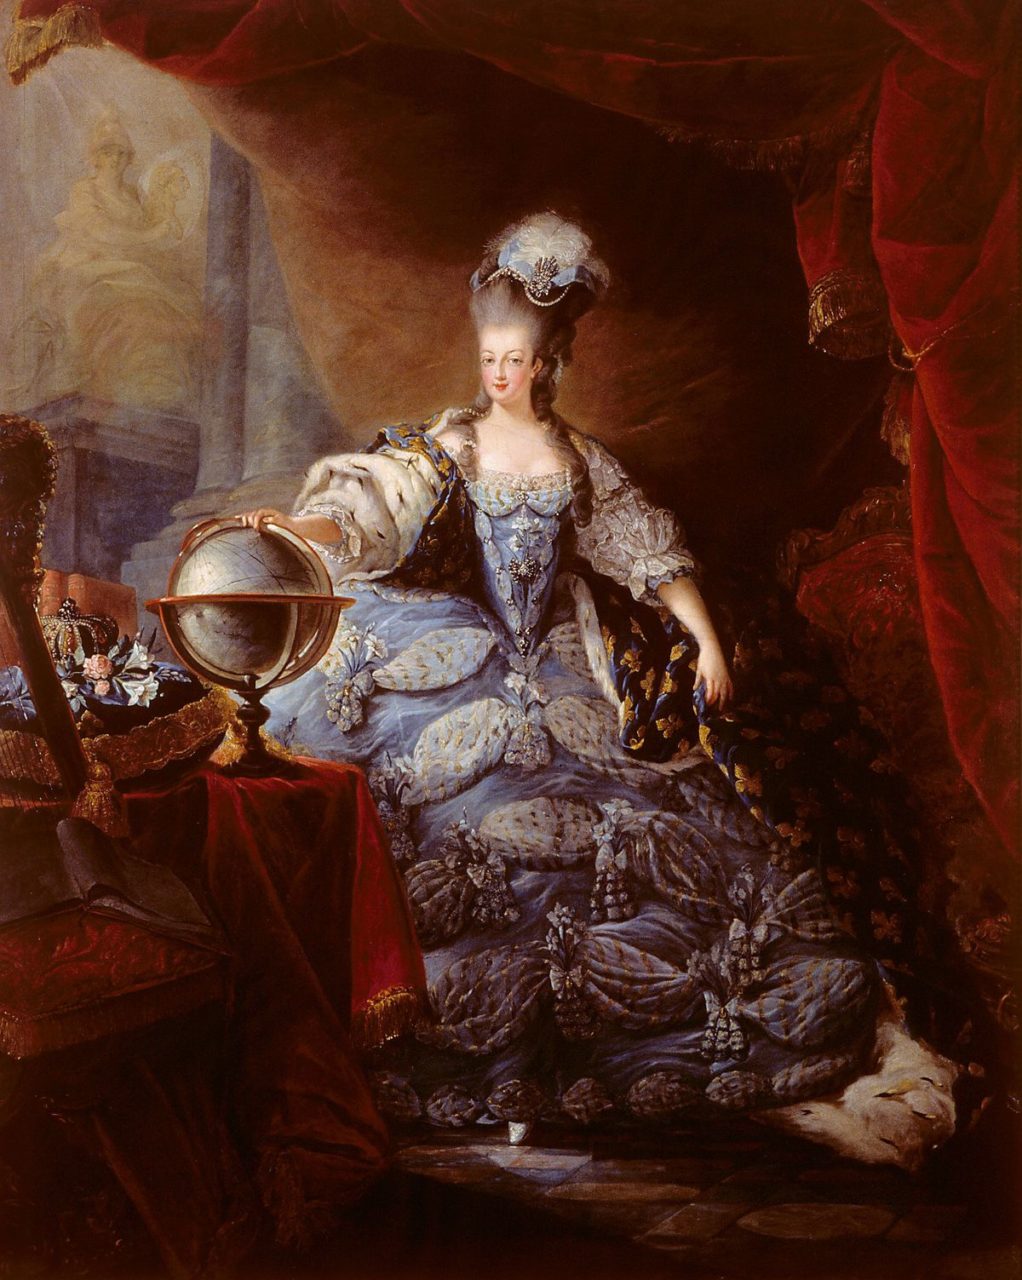 Marie Antionette in Court Clothes with her Hand on a Globe